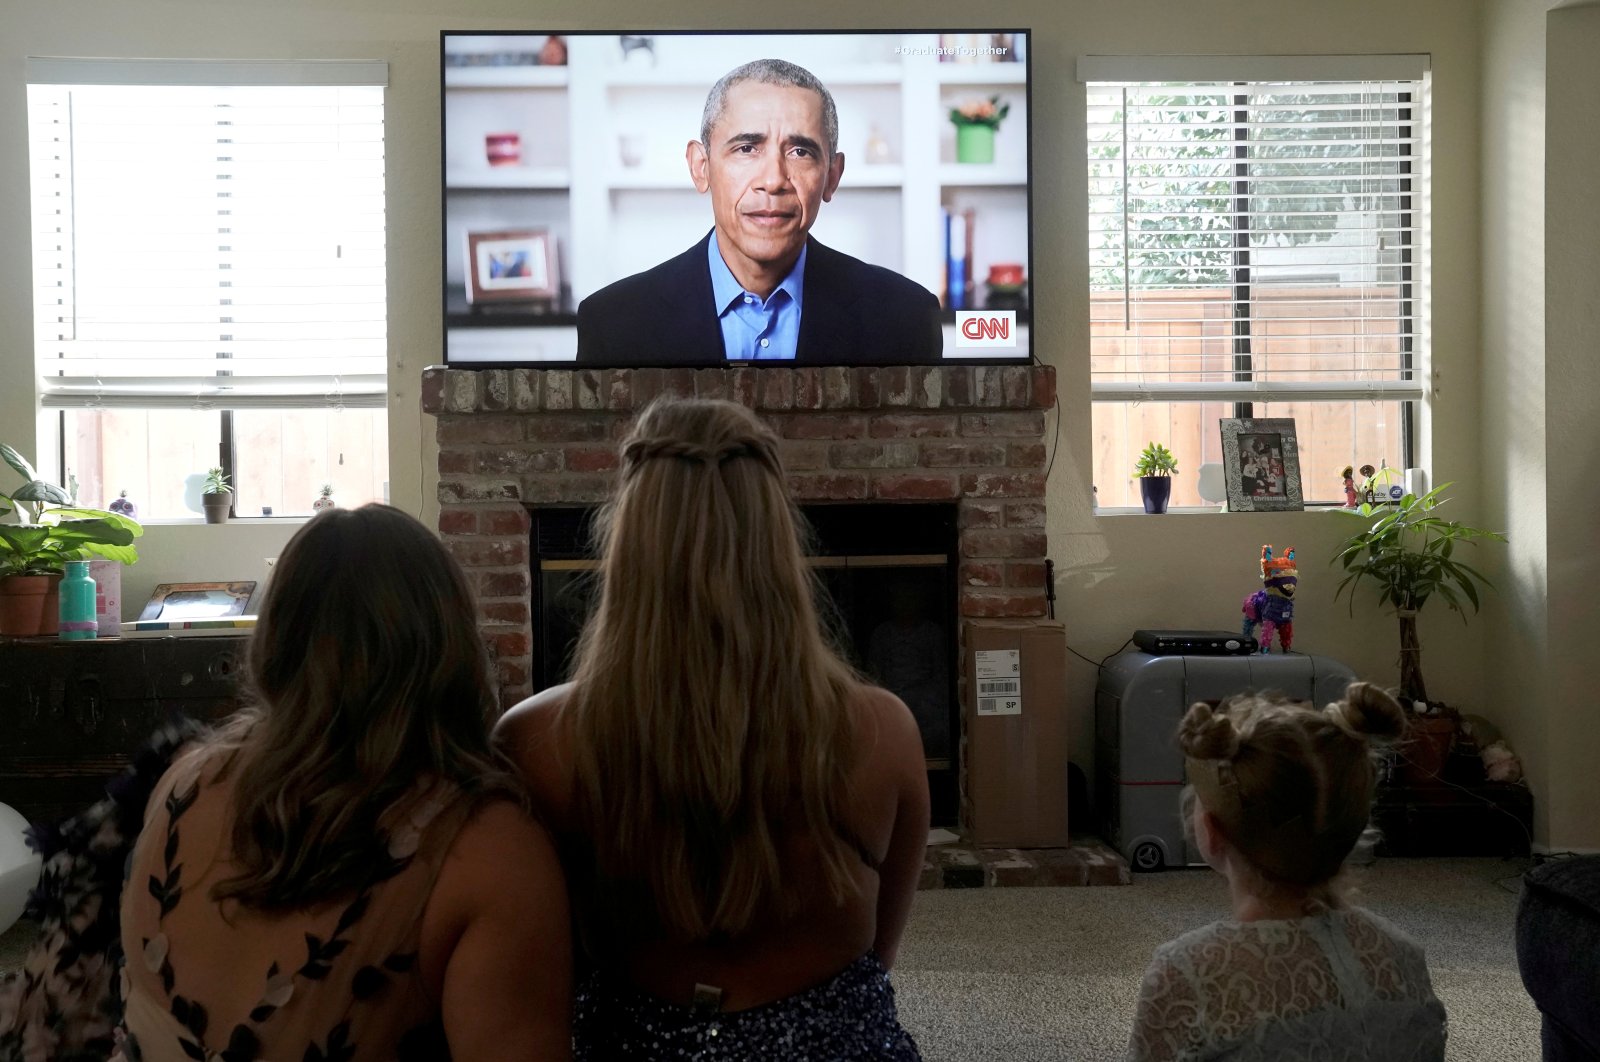 Torrey Pines High School graduating student Phoebe Seip (C), 18, and her sisters Sydney (L), 22, and Paisley, 6, watch former U.S. President Barack Obama deliver a virtual commencement address to millions of high school seniors who will miss graduation ceremonies due to the COVID-19 outbreak, while celebrating Phoebe's canceled prom night at home in San Diego, California, U.S., May 16, 2020. (Reuters Photo)